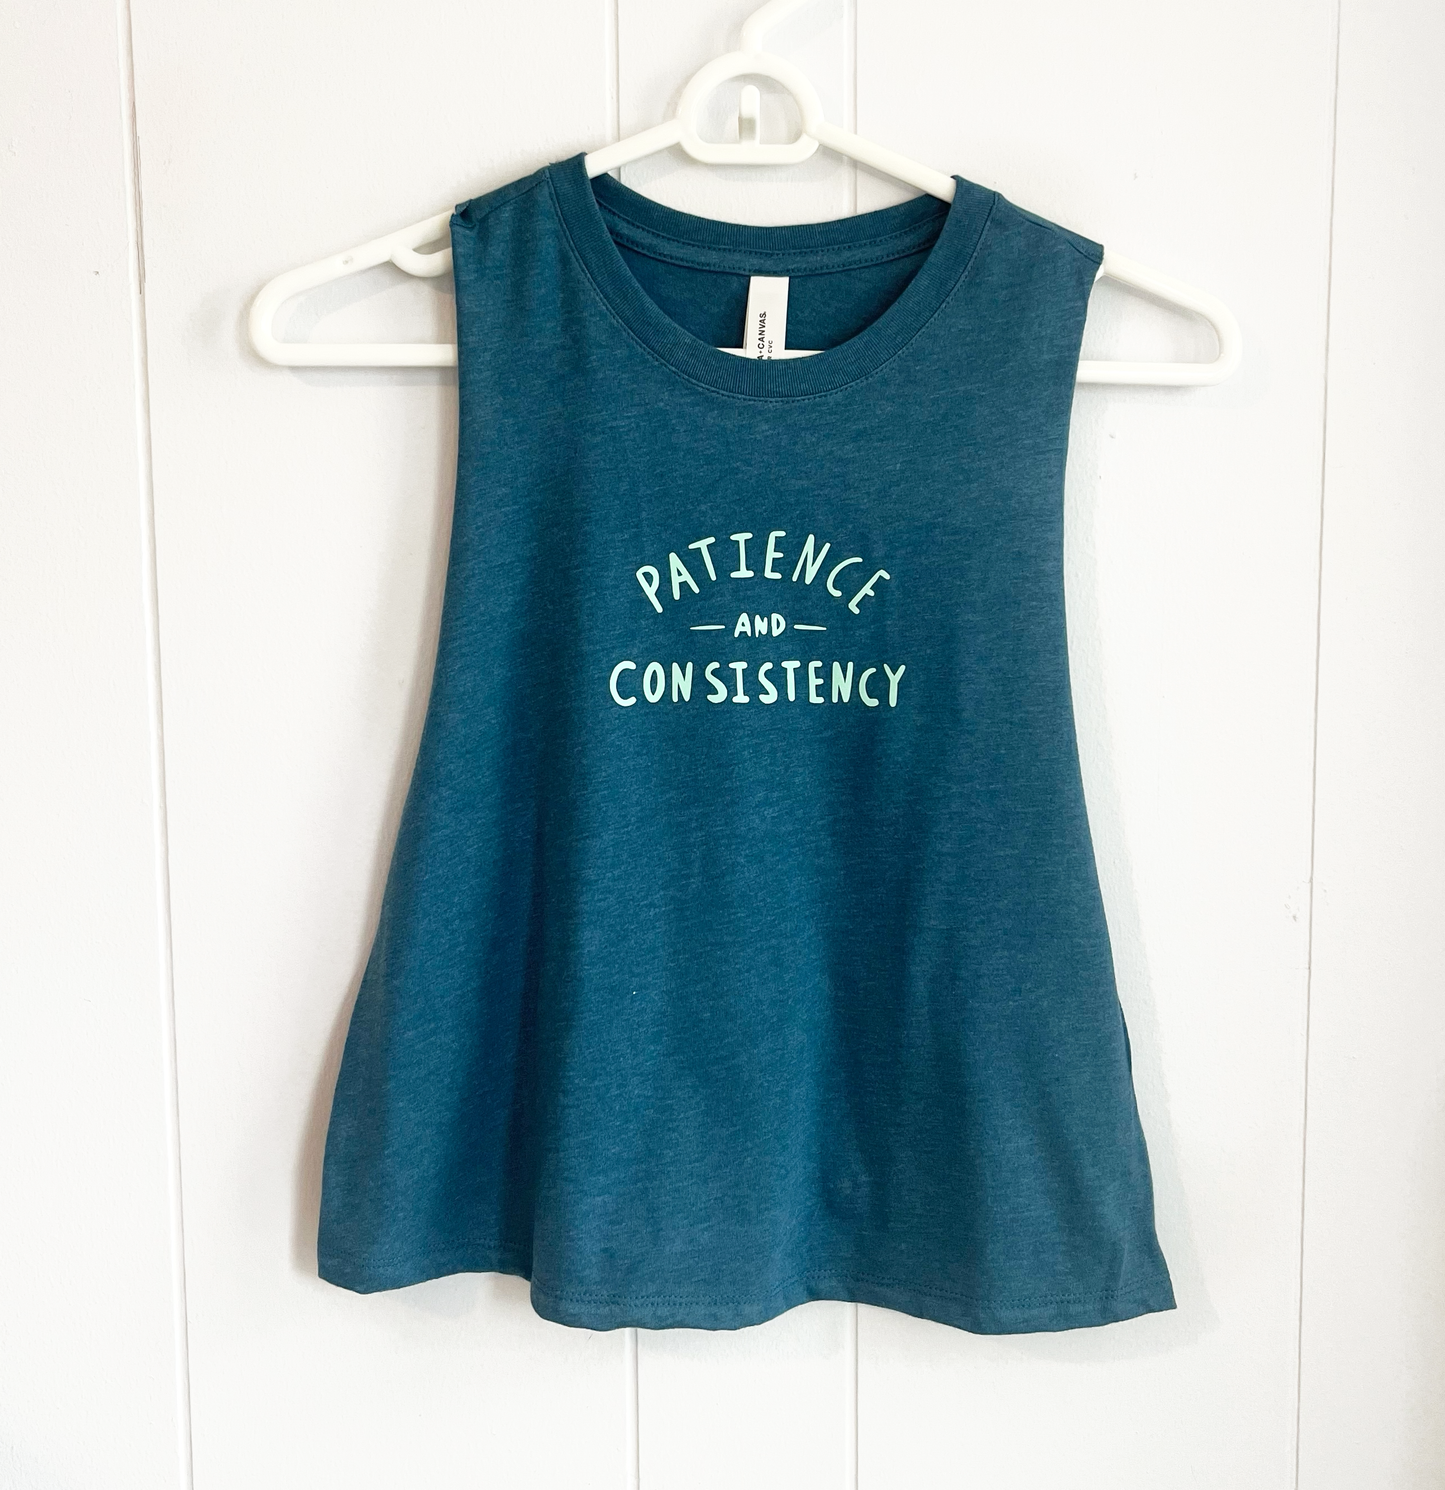 patience and consistency tank top in blue with teal lettering